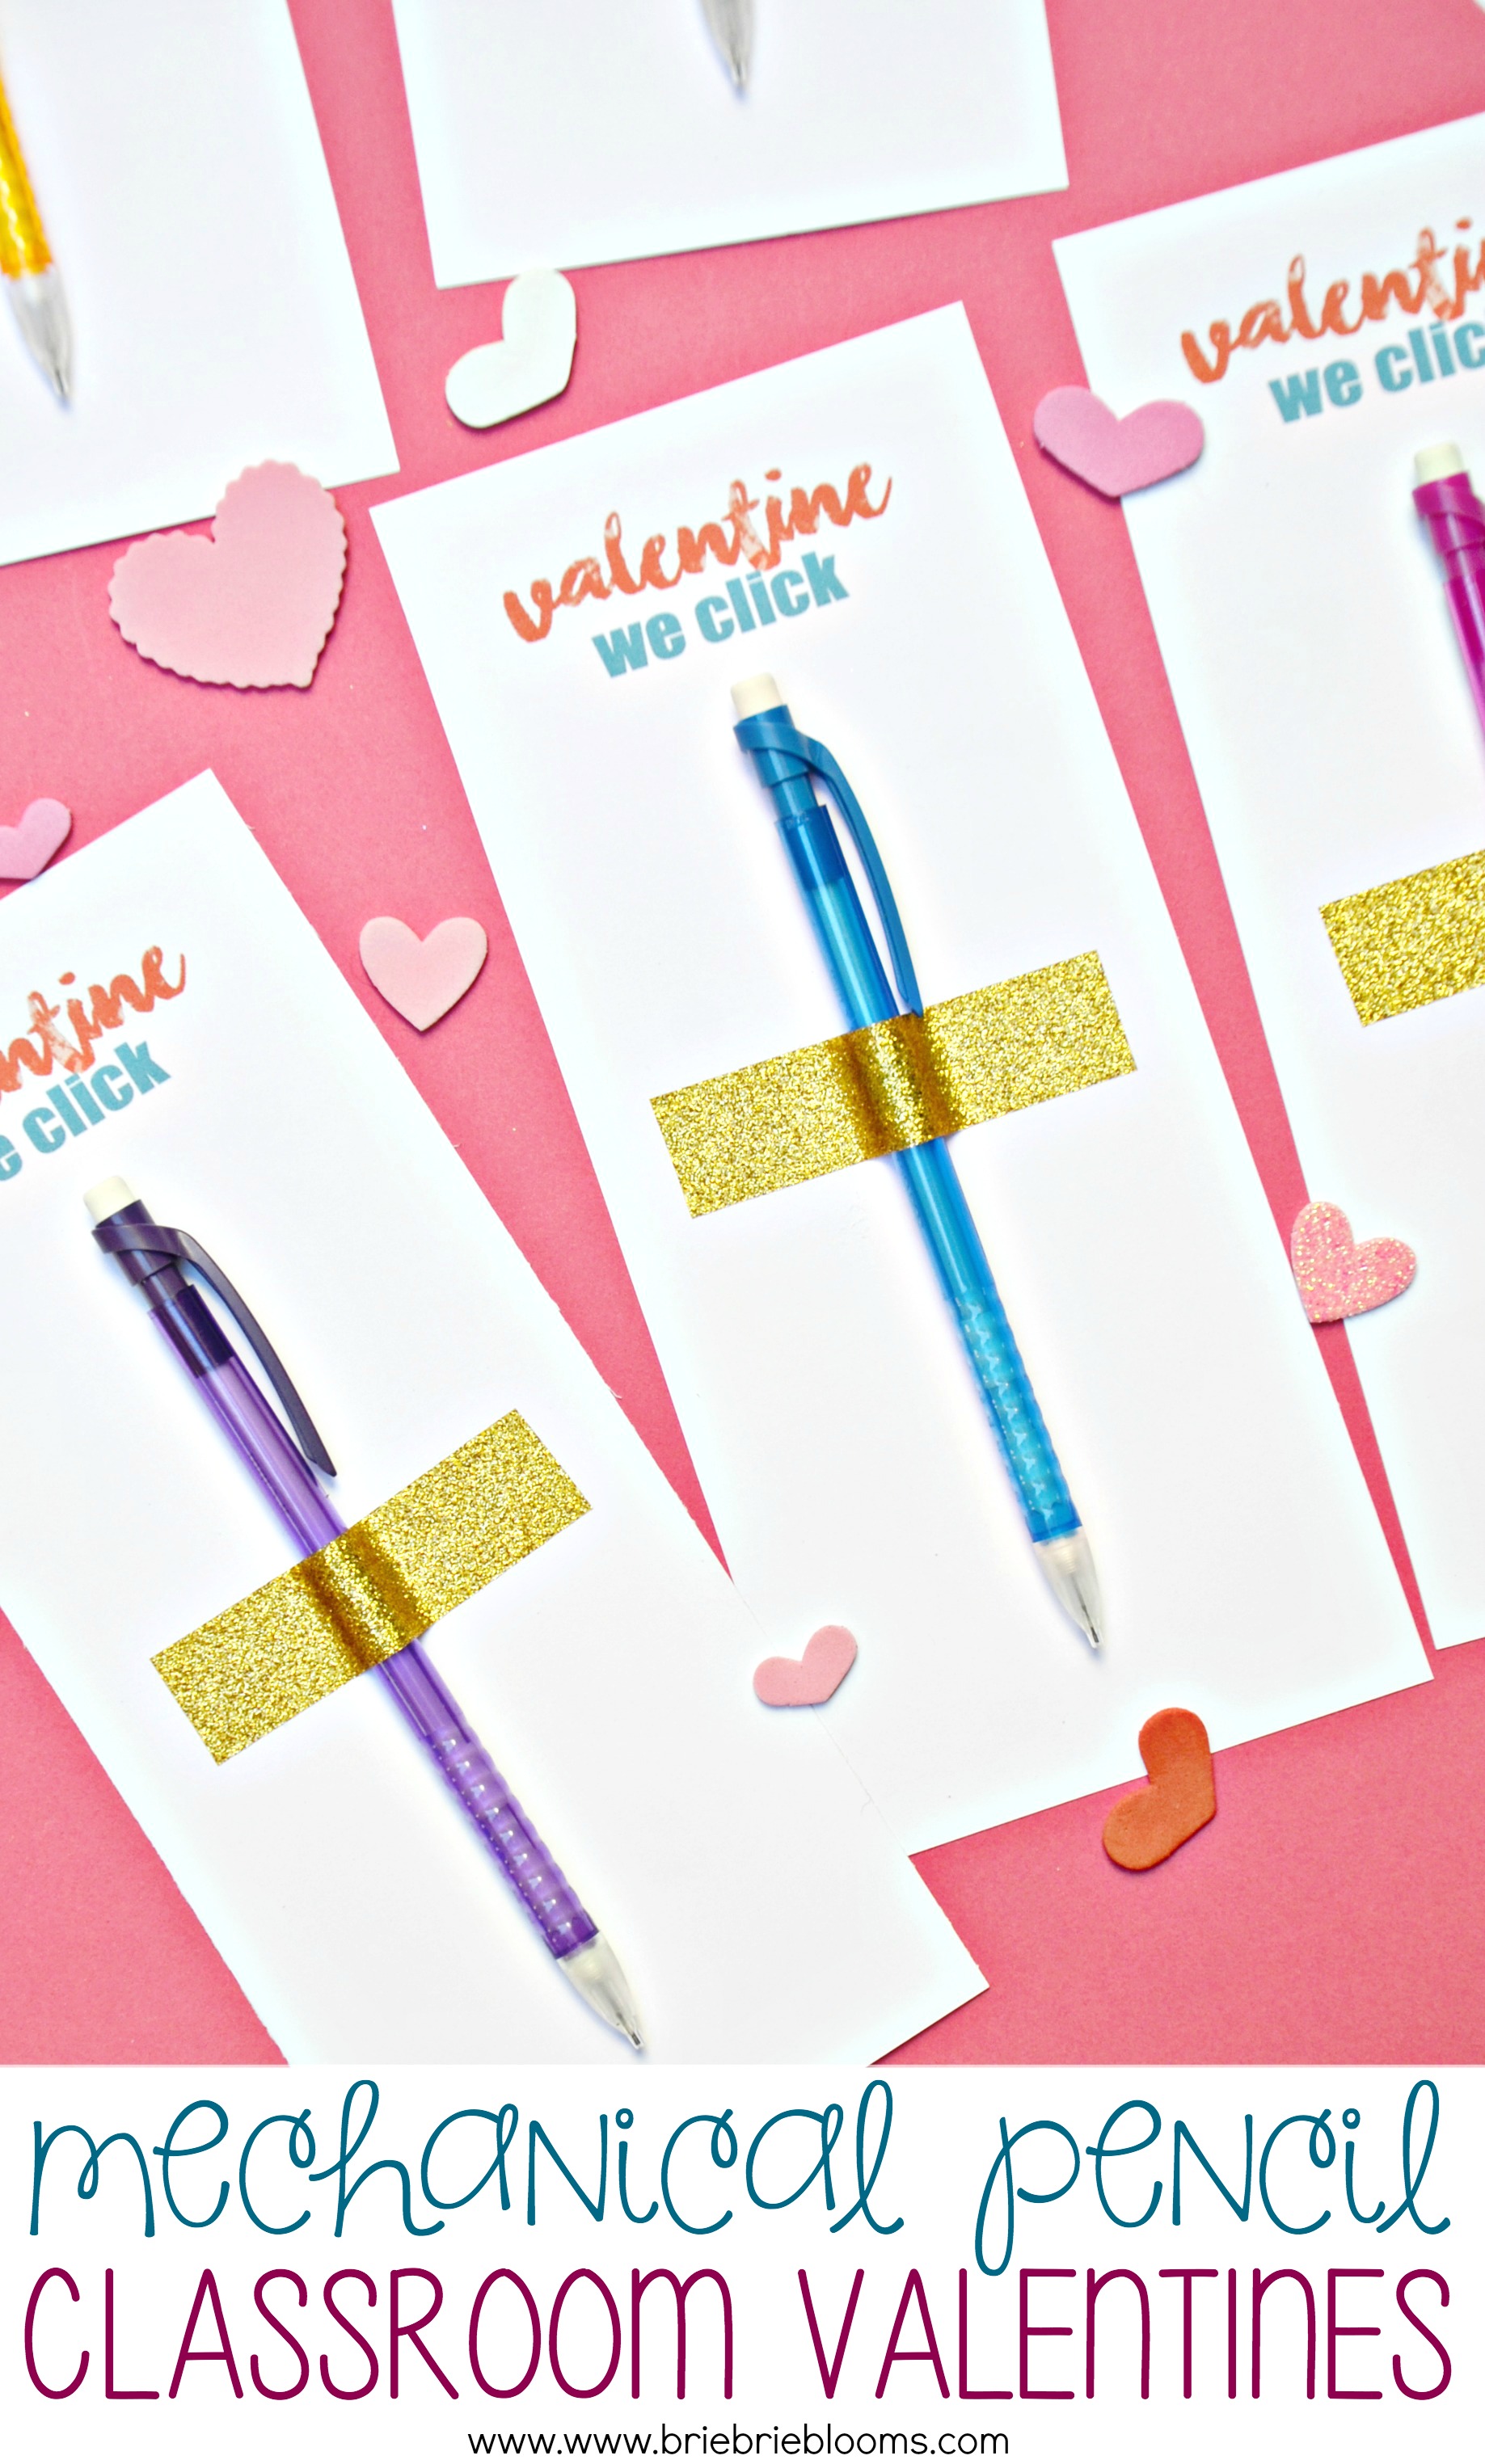 Mechanical pencil valentines are perfect for a candy free Valentine's Day classroom party. Print my free printable and pick up a $5 bag of pencils!